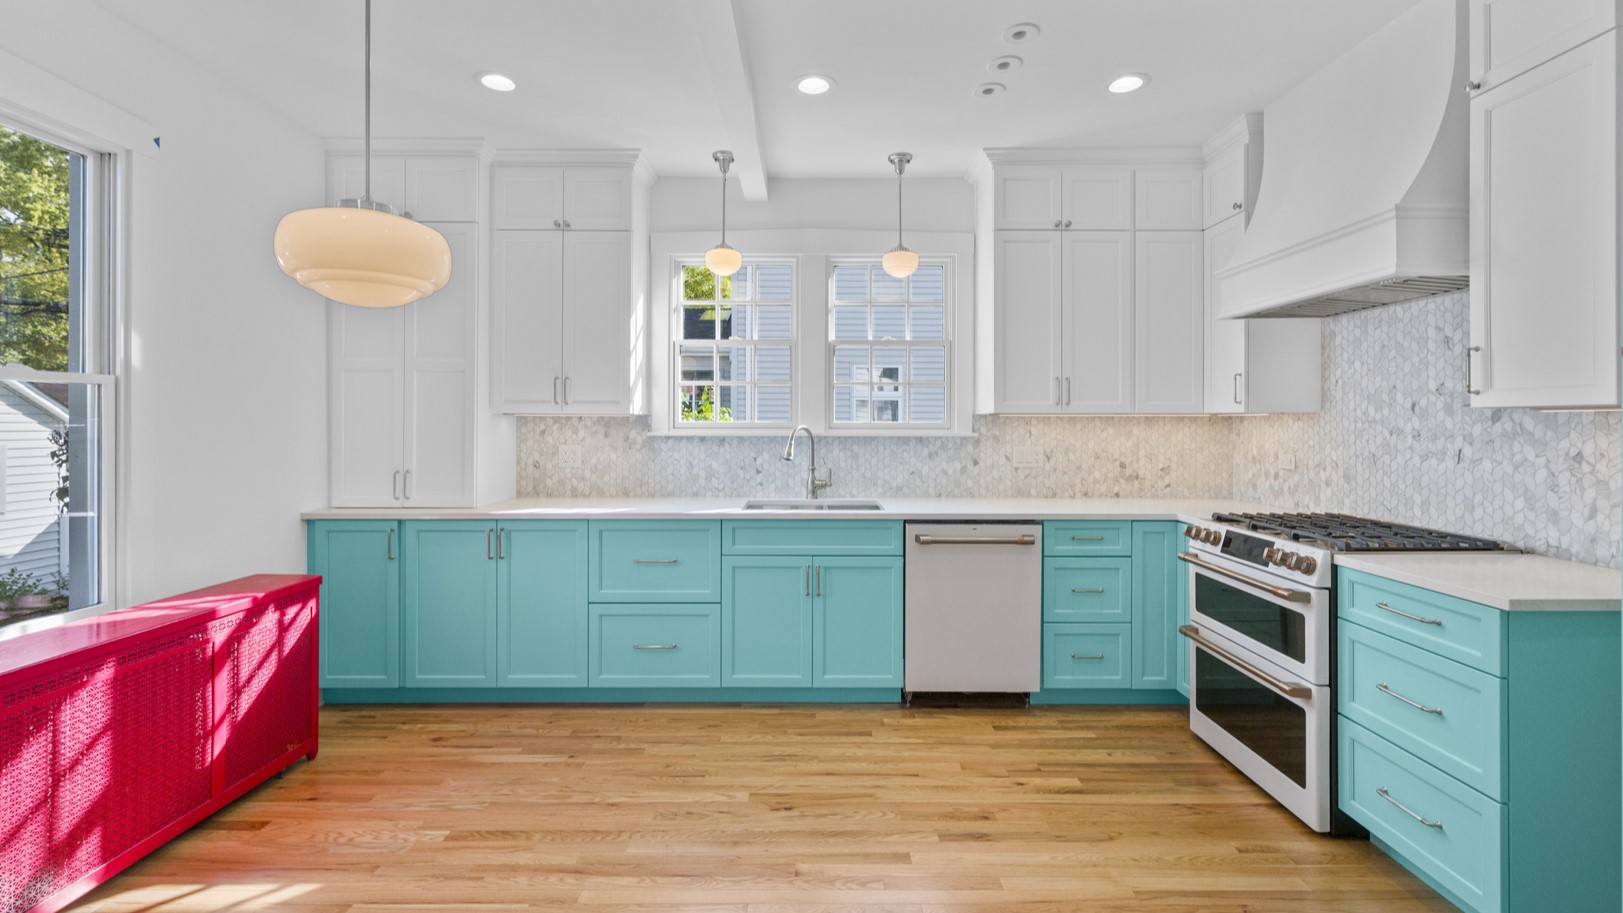 Kitchen remodel with pink and teal blue cabinets in Glenview, IL home